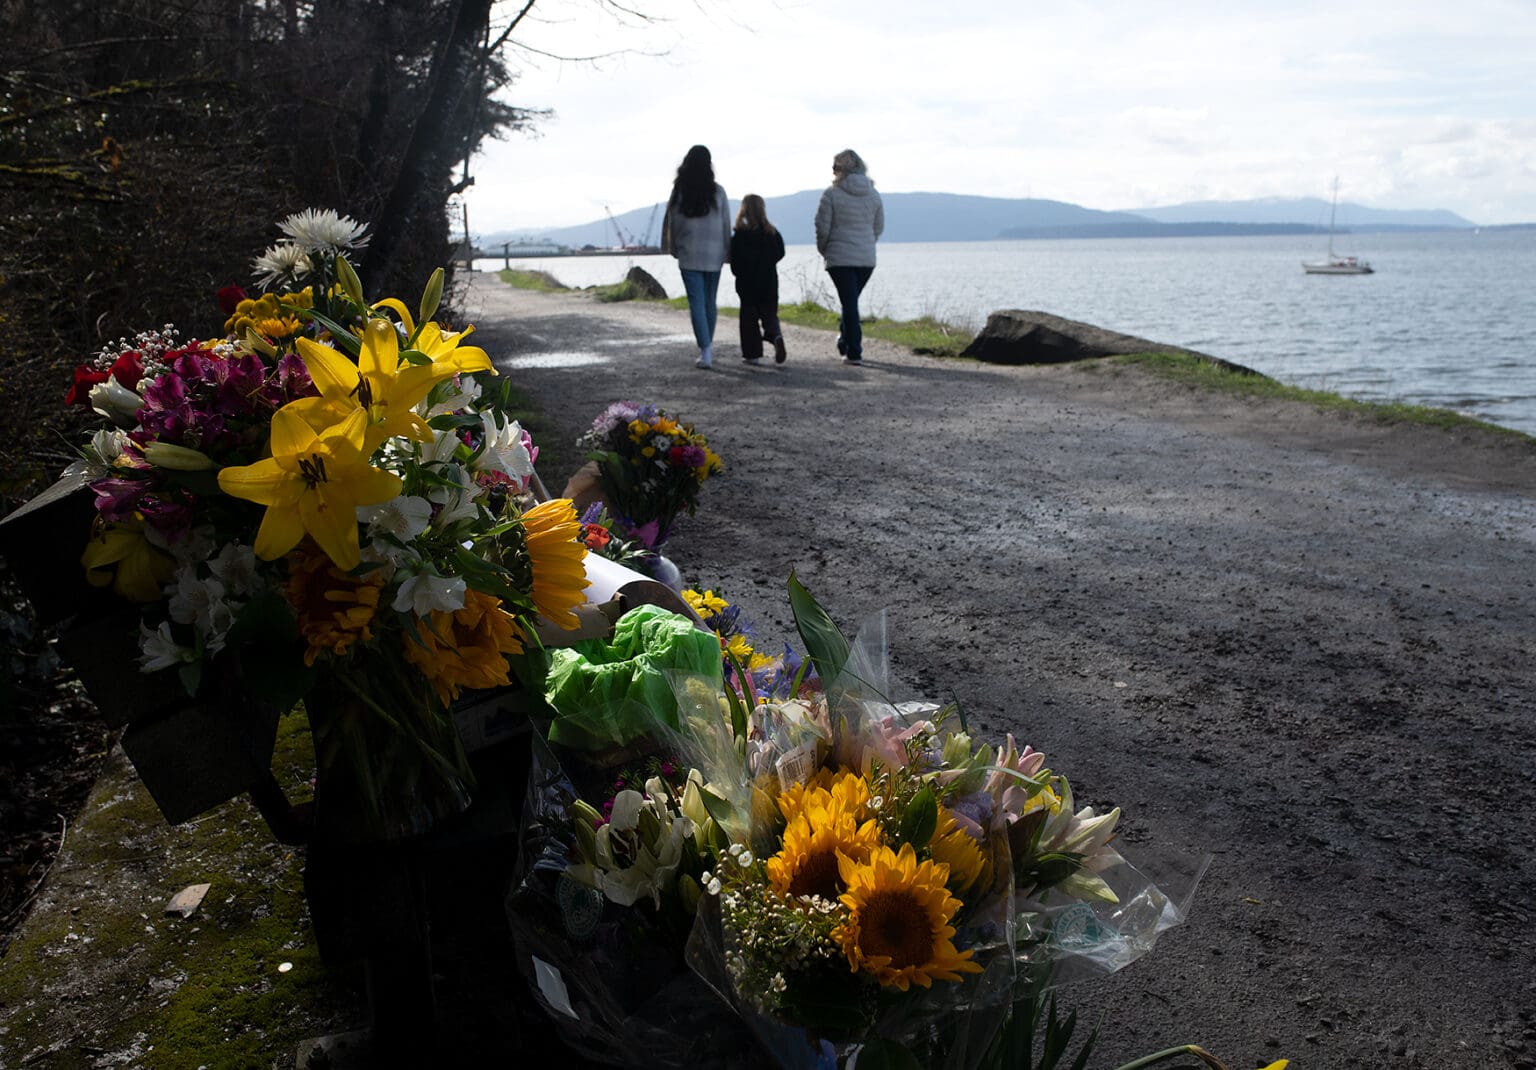 A family that stopped to look at the memorial walks past the bench that Henry King frequented near Taylor Dock where bouquets of flowers are placed to honor him.